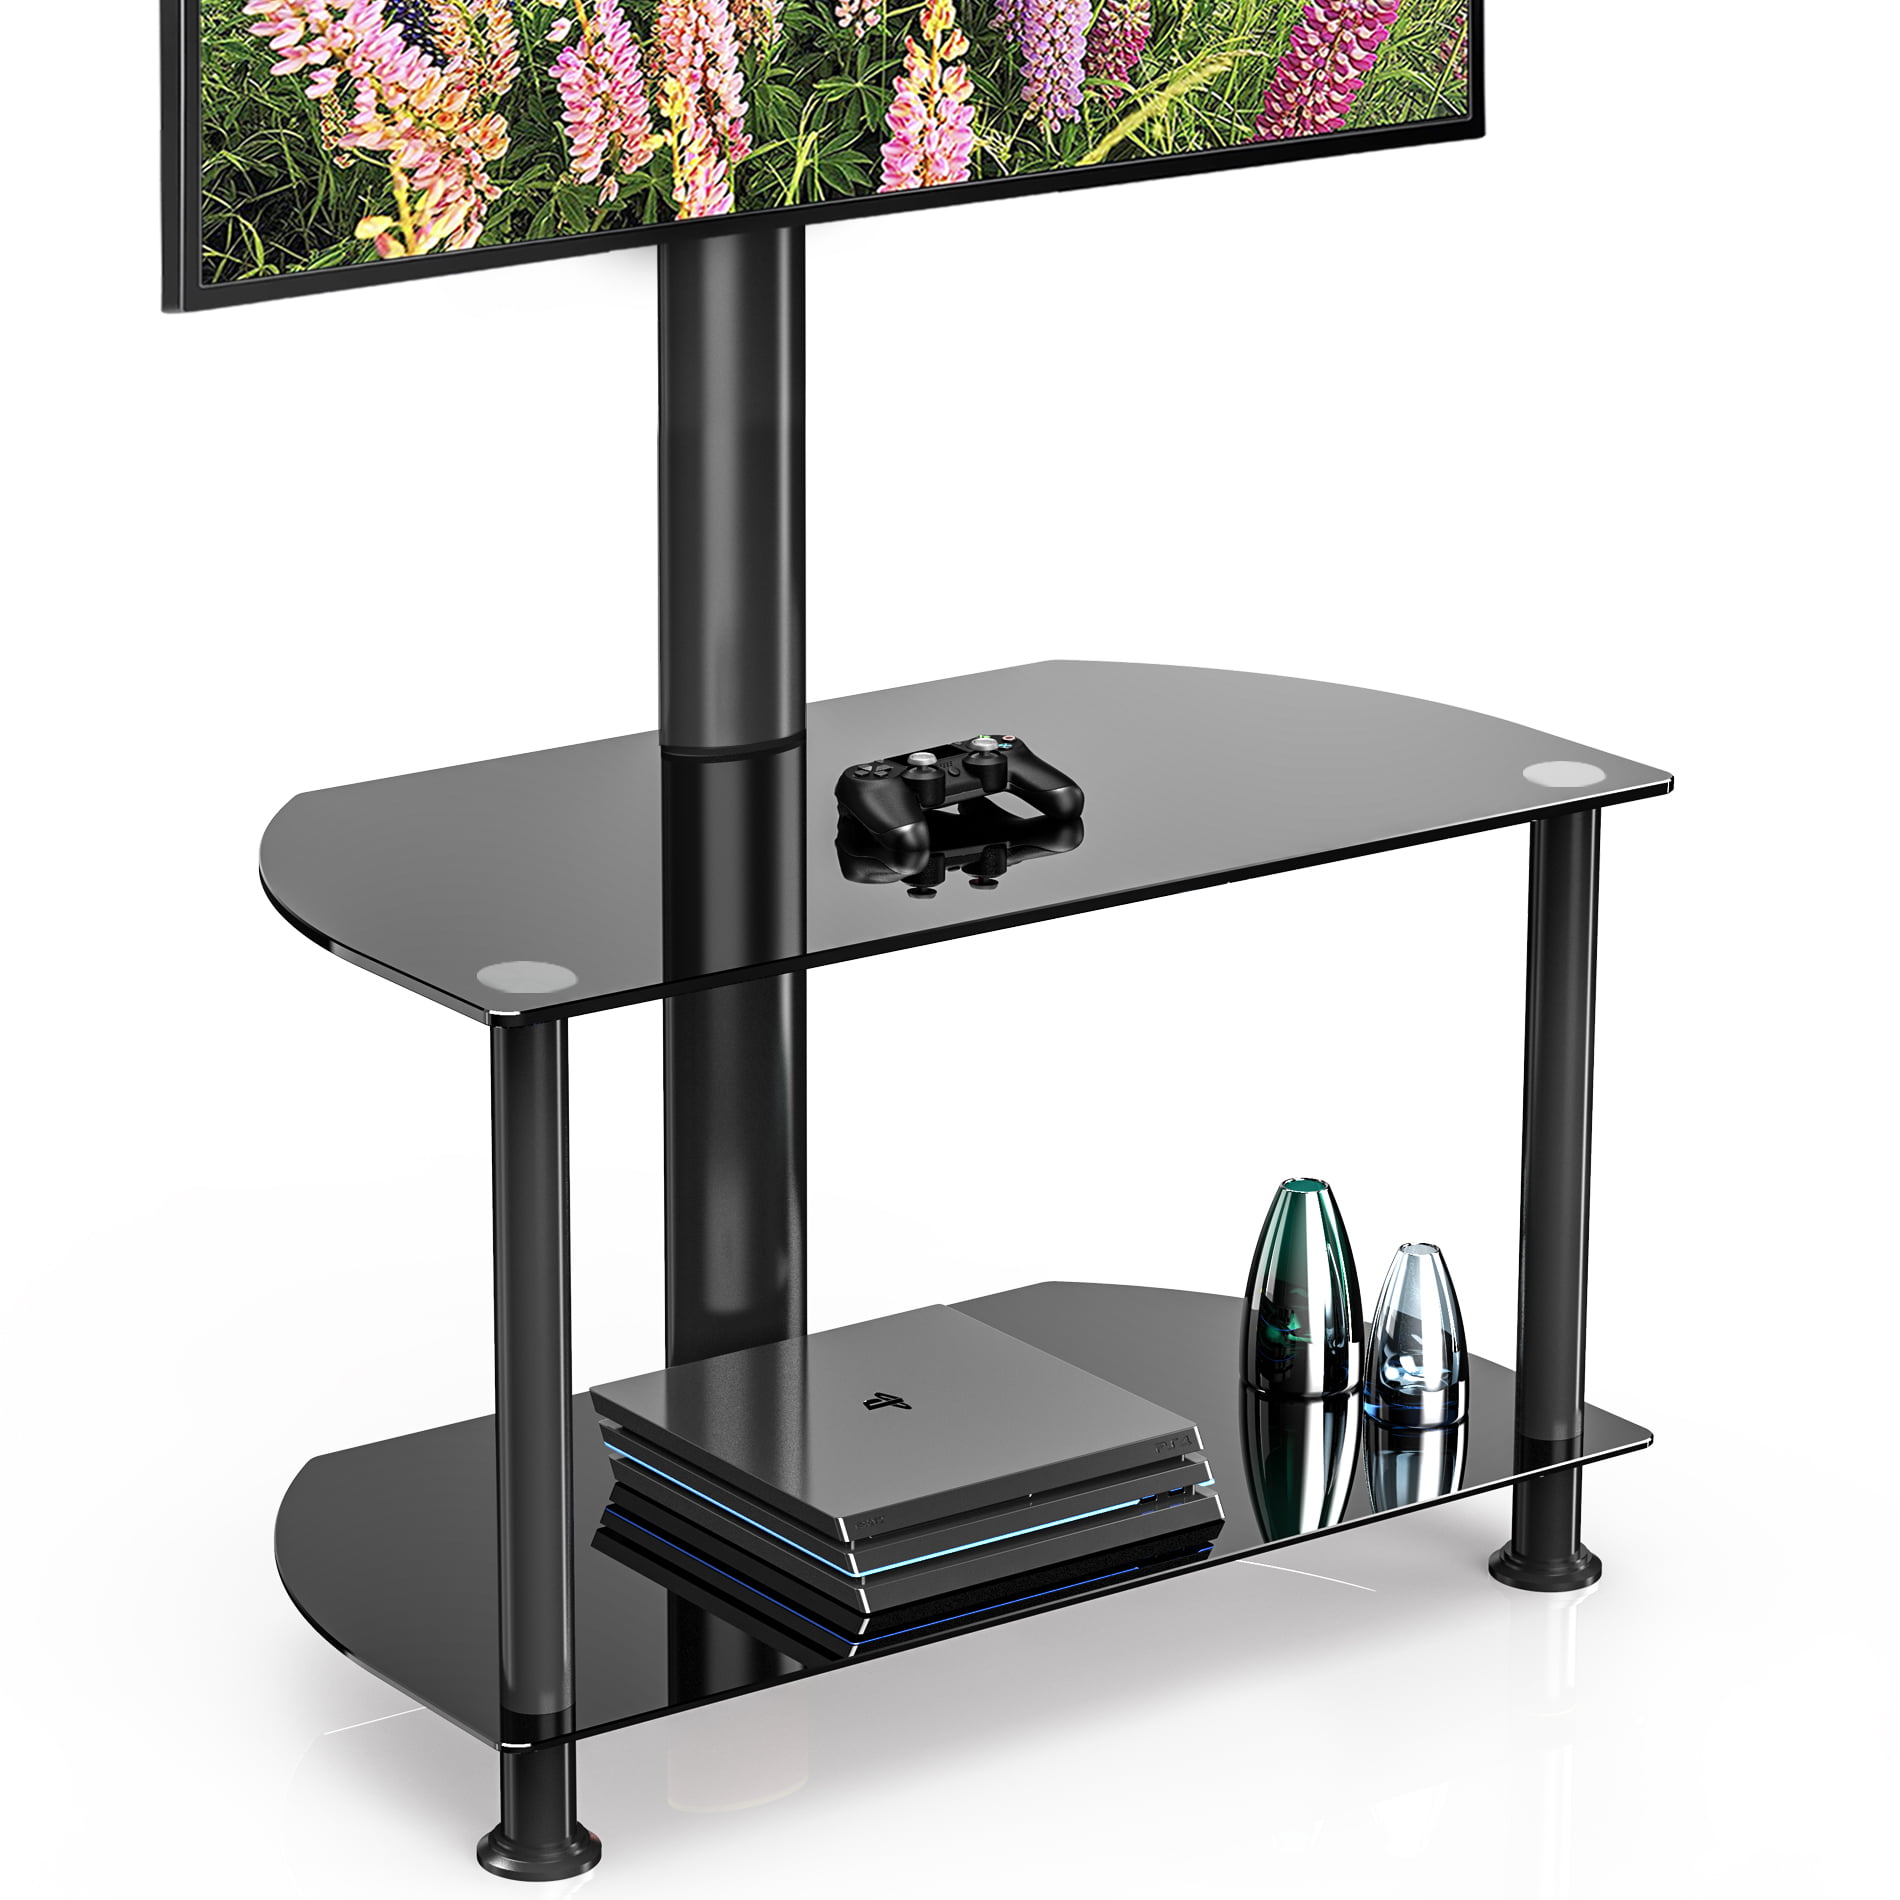 Fitueyes 2 Tiers Floor Tv Stand With Swivel Mount For 32 To 55 Inch